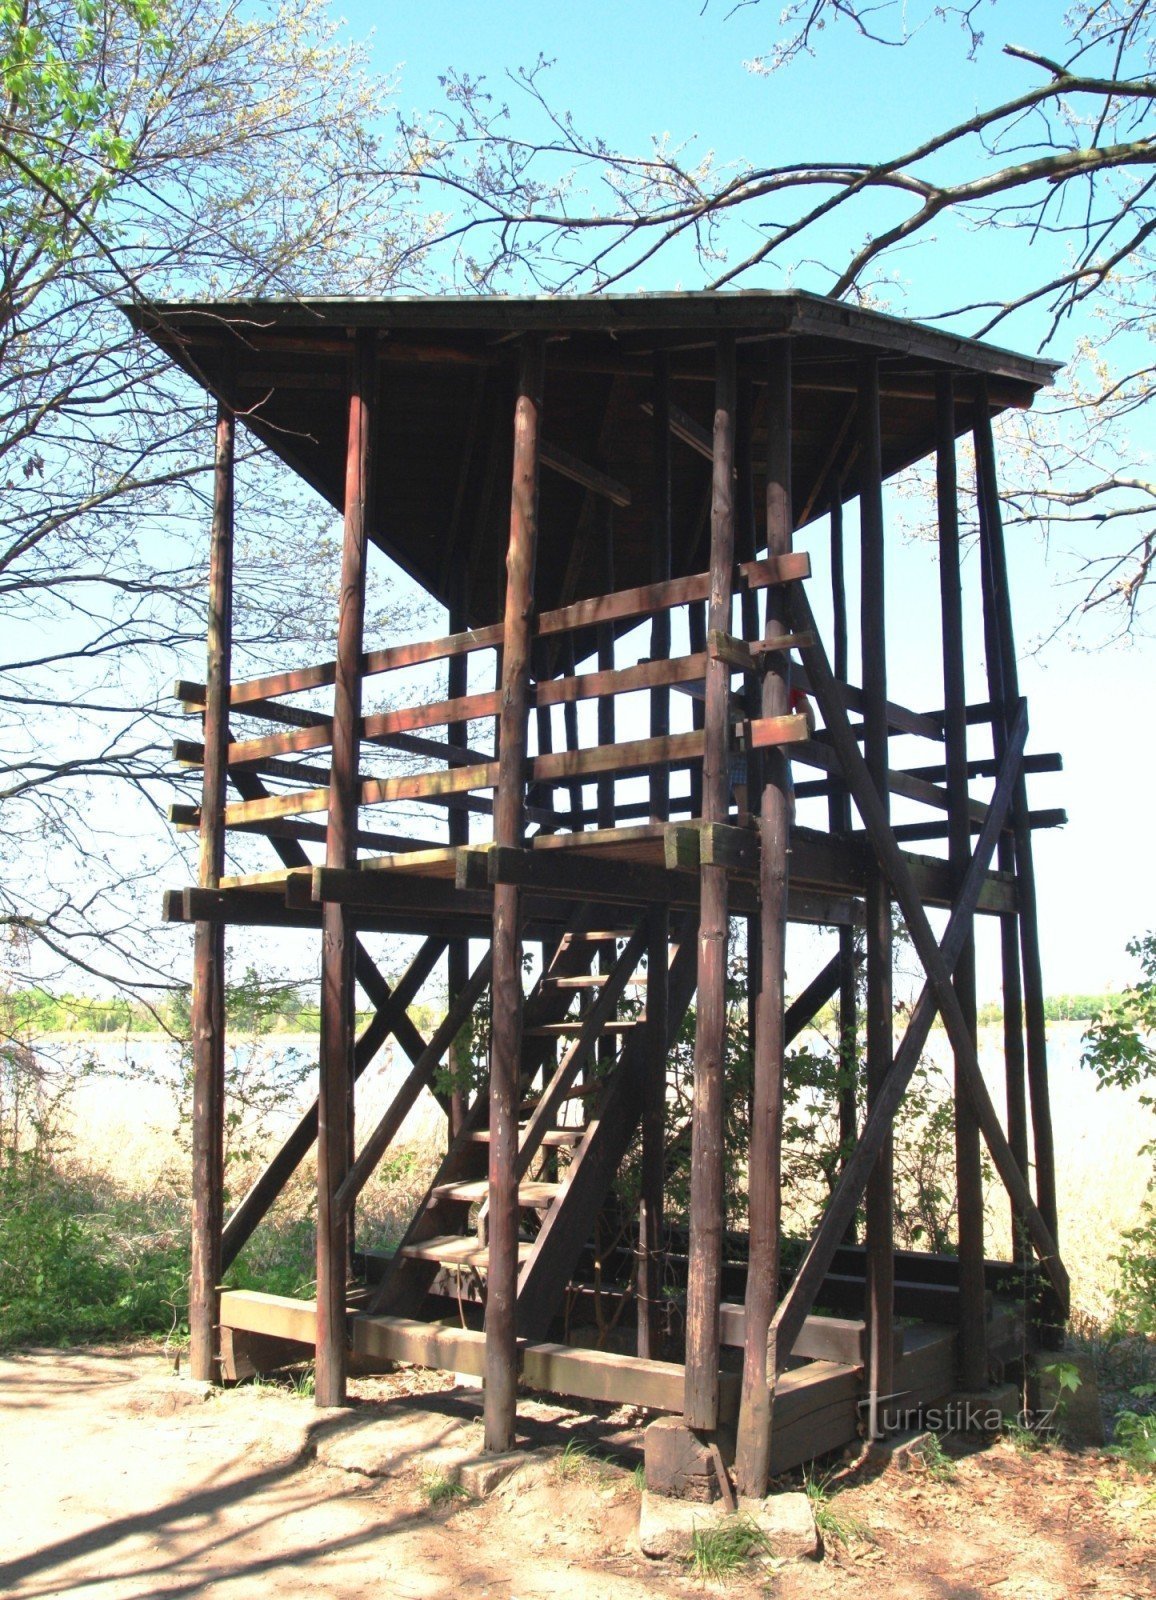 The former observation tower at stop No. 12